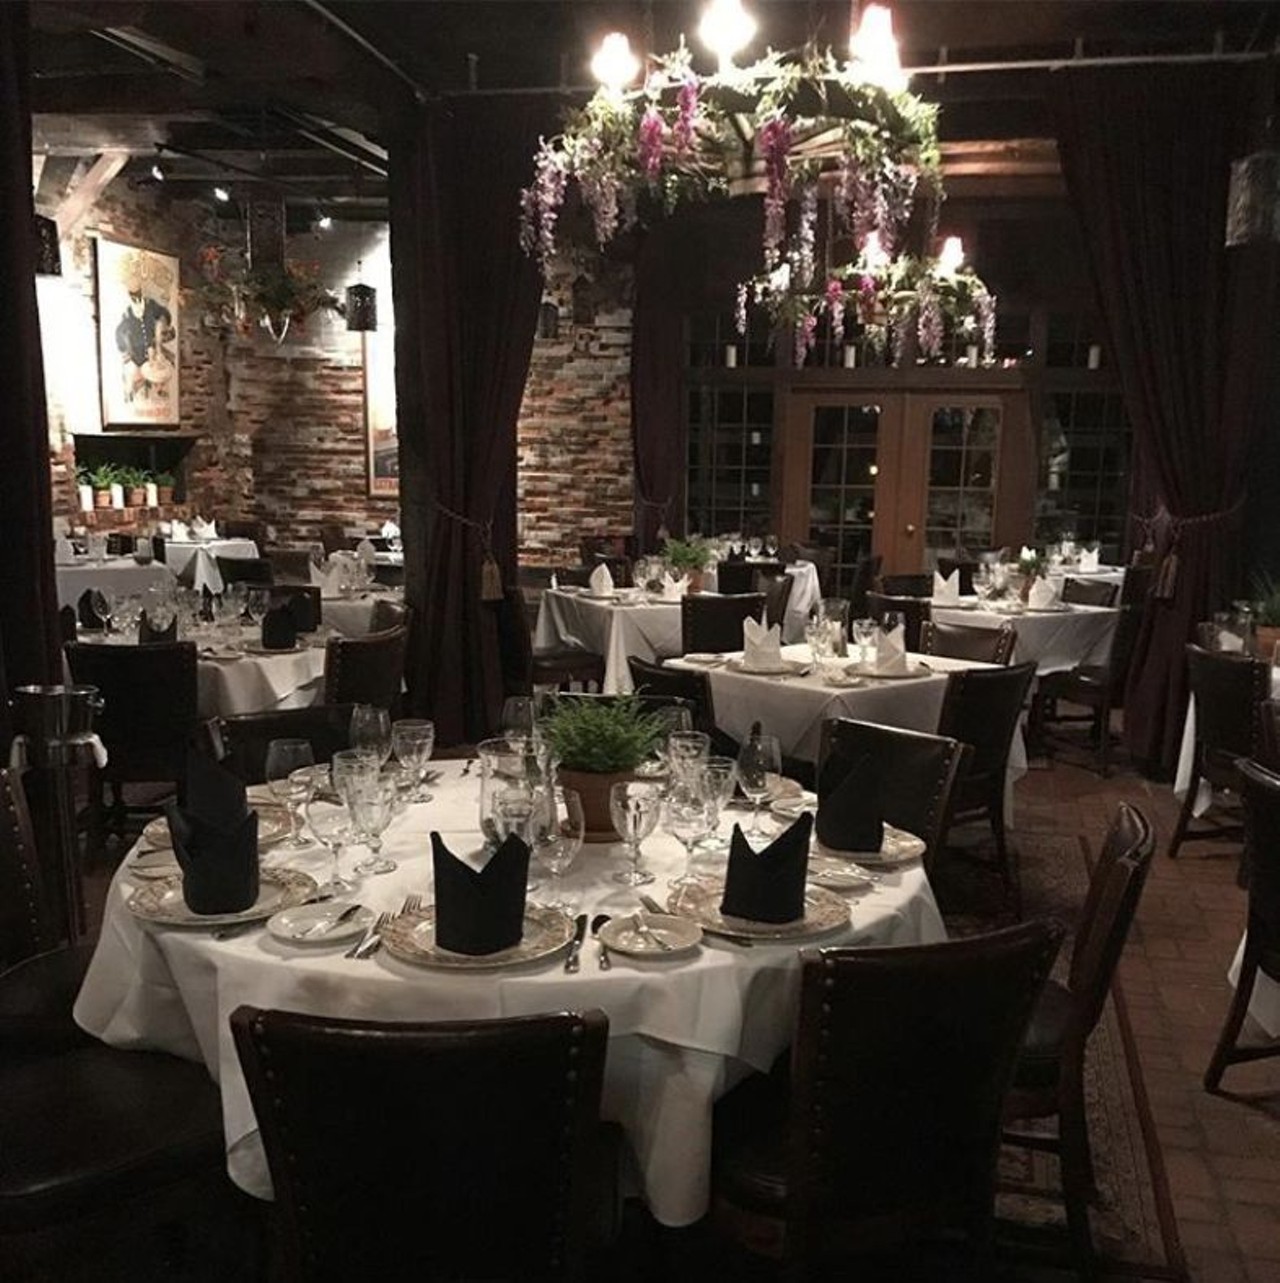 Chez Francois
555 Main Street, Vermilion
Chez Francois is one of the most romantic restaurants in the Cleveland area and its location &#151; perched on the Vermilion River, giving diners major waterfront views &#151; is a huge part of its intimate atmosphere.
Photo via kristopher_keis/Instagram